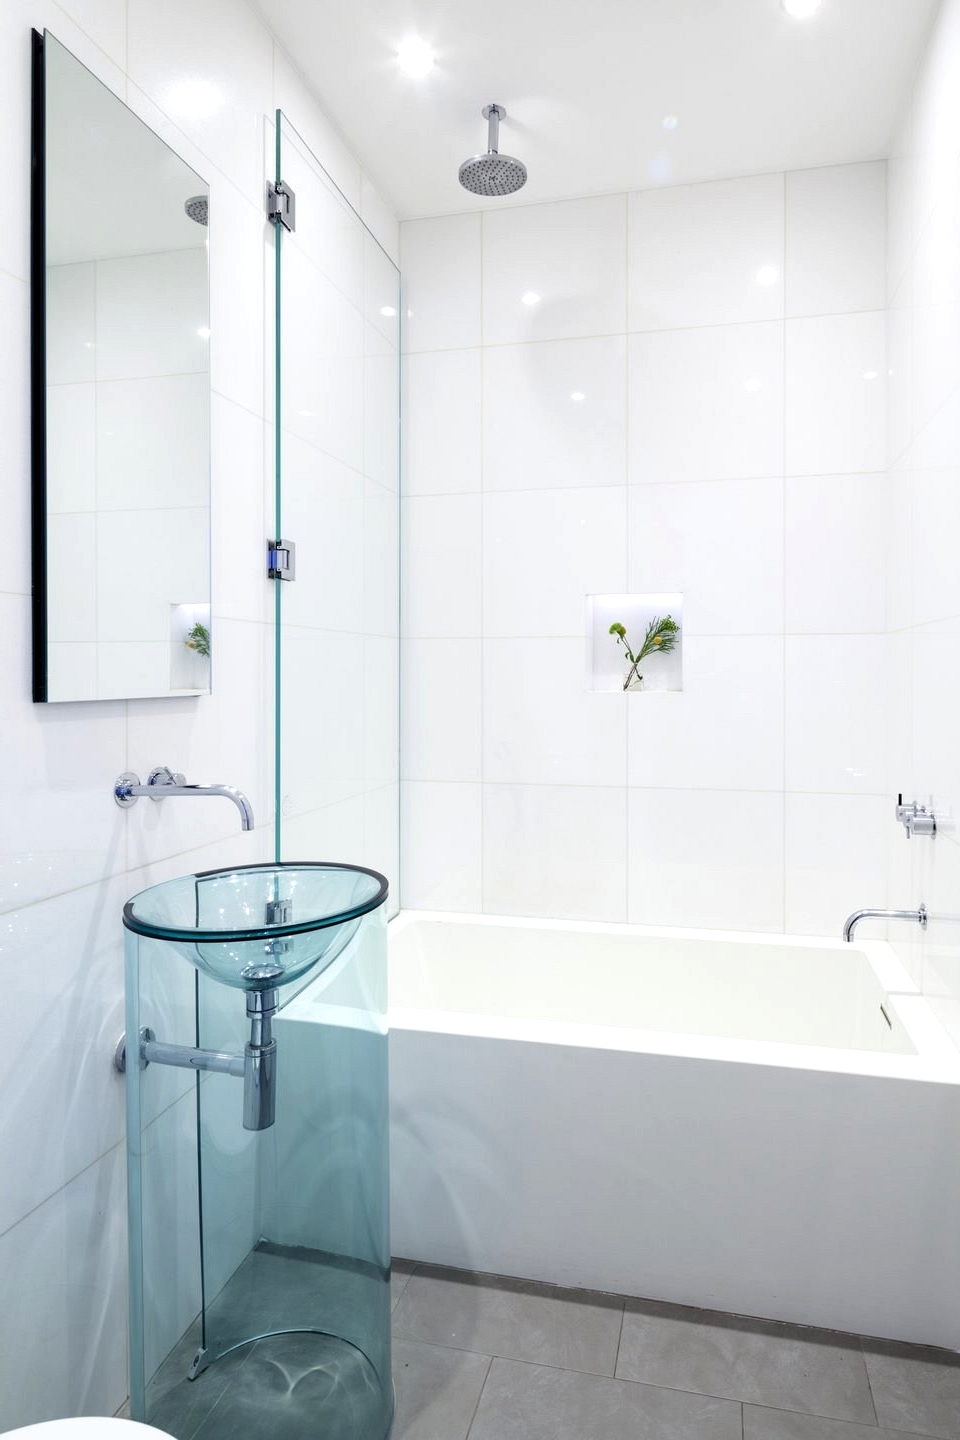 Get a Modern Bathroom with These Easy Ideas